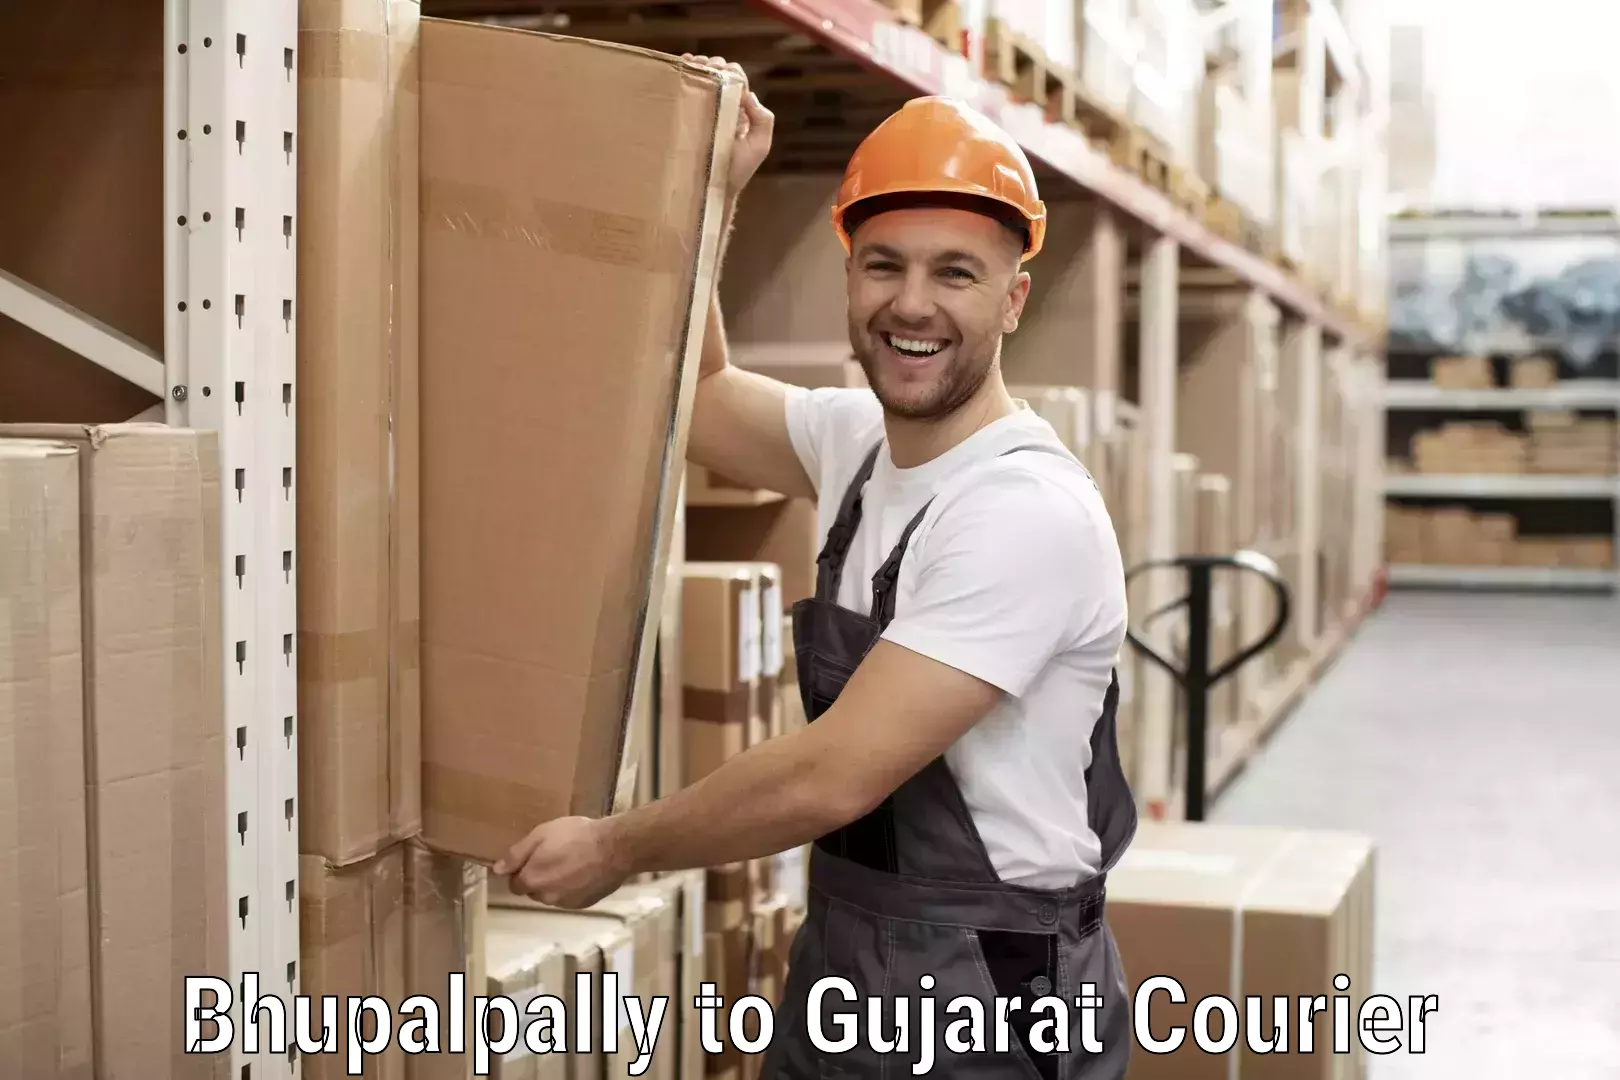 Courier service comparison Bhupalpally to Dholera